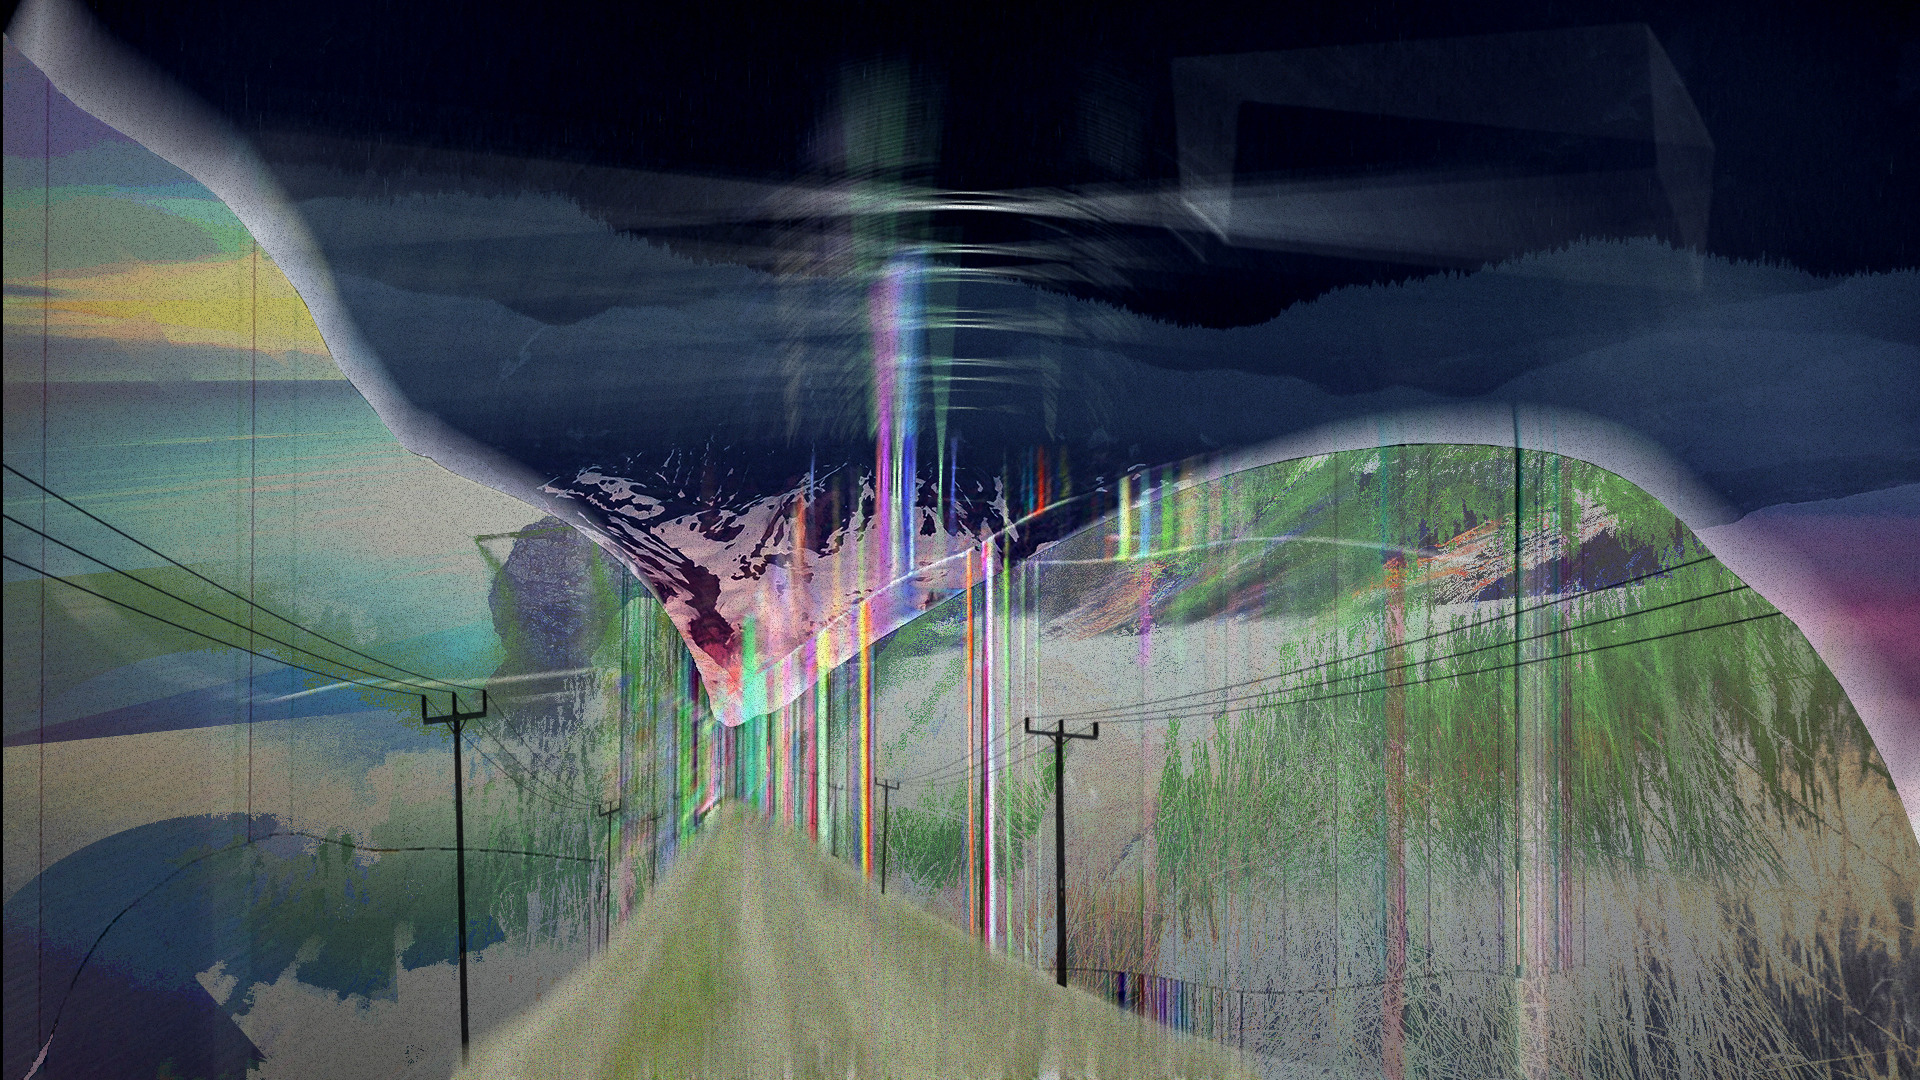 digital Art, Abstract, Photo Manipulation, Psychedelic, Distortion, Power Lines, Glitch Art, Utility Pole Wallpaper